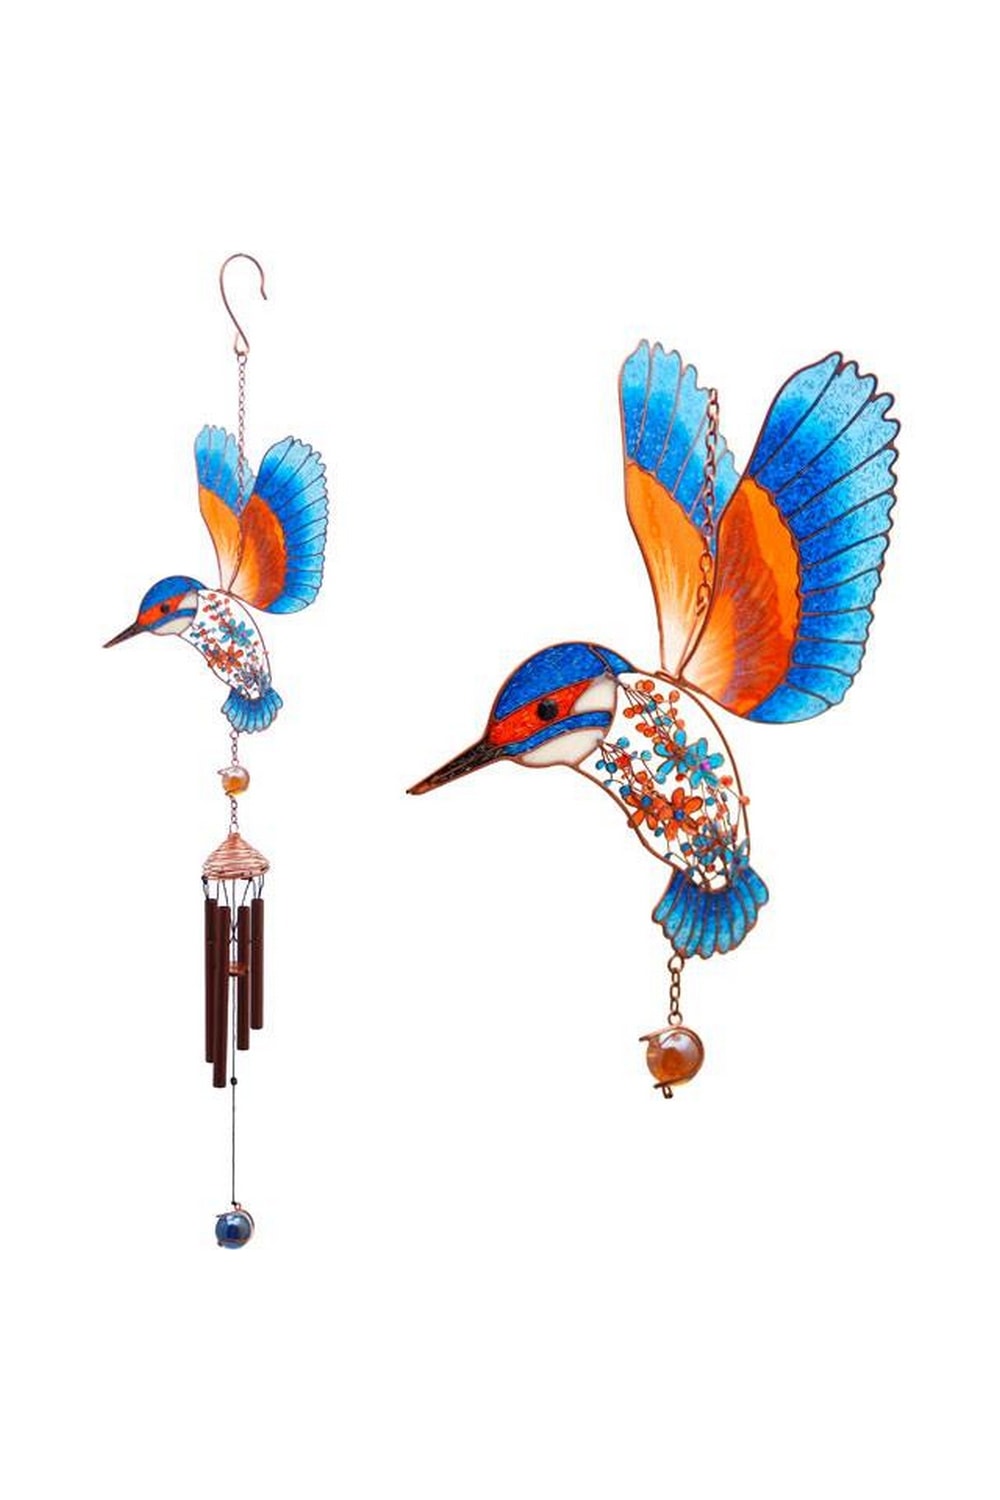 Something Different Kingfisher Wind Chime